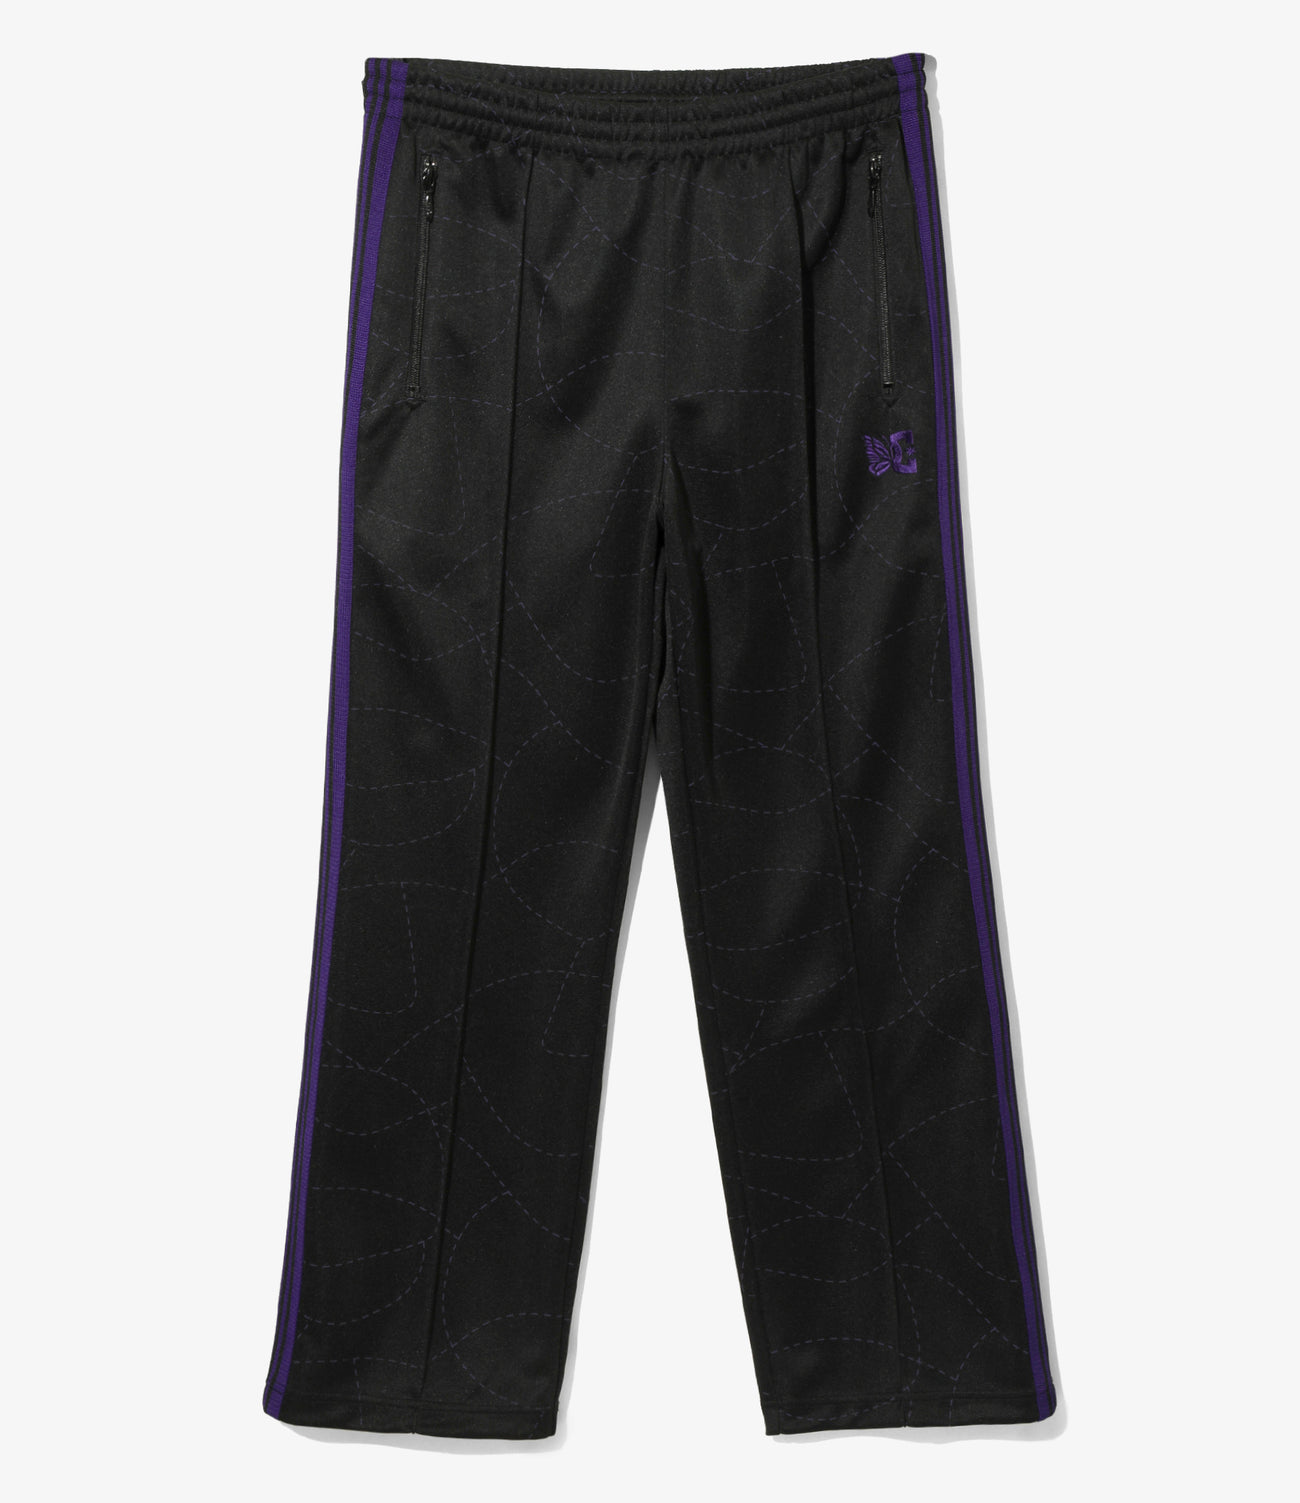 TRACK PANT - POLY SMOOTH / PRINTED